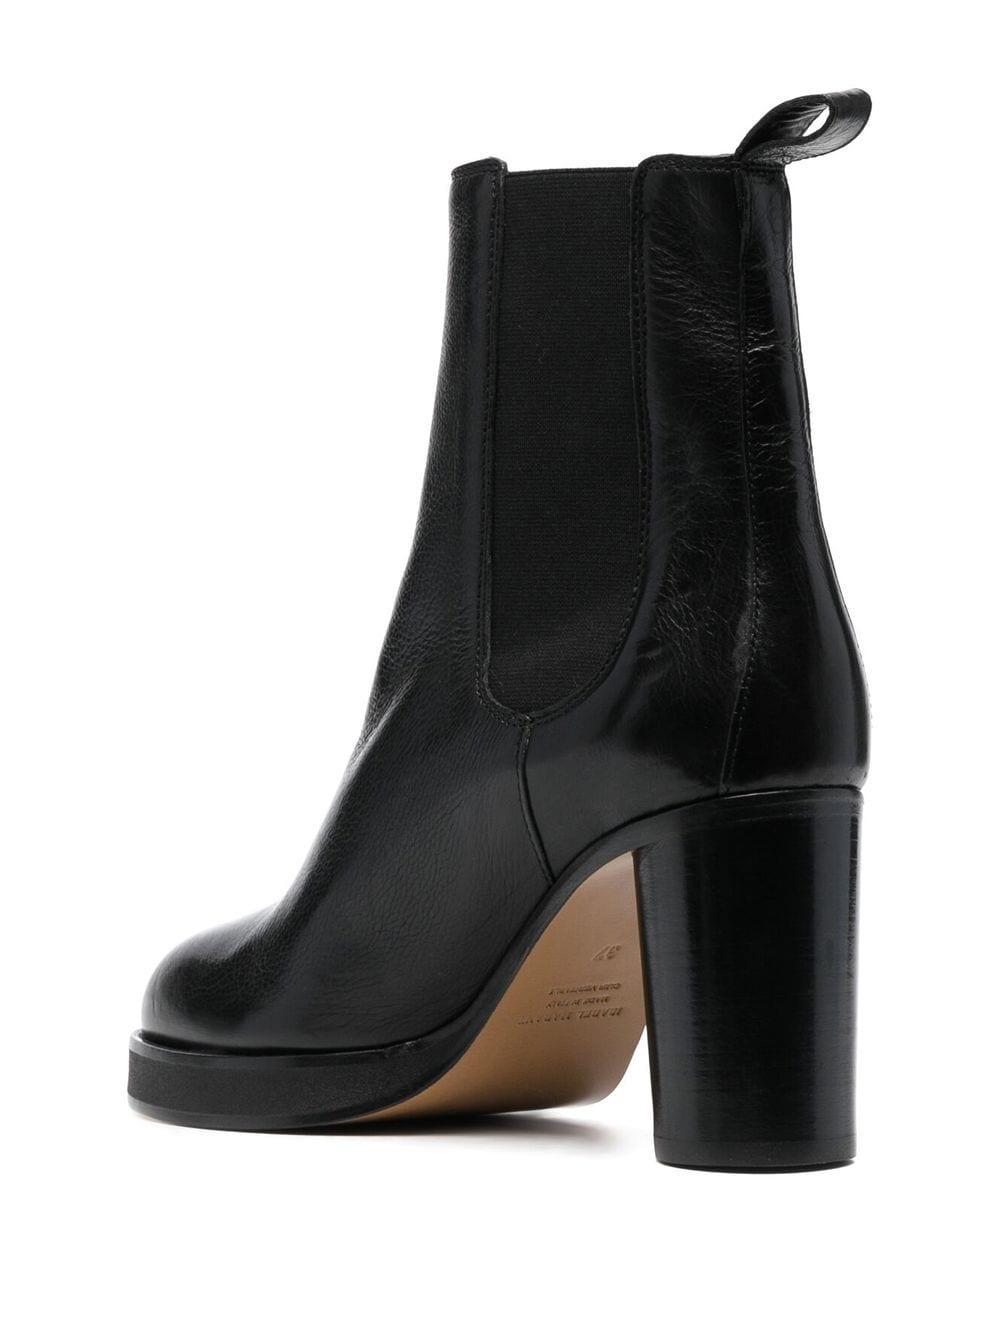 Isabel Marant Lalix Leather Ankle Boots in Black | Lyst